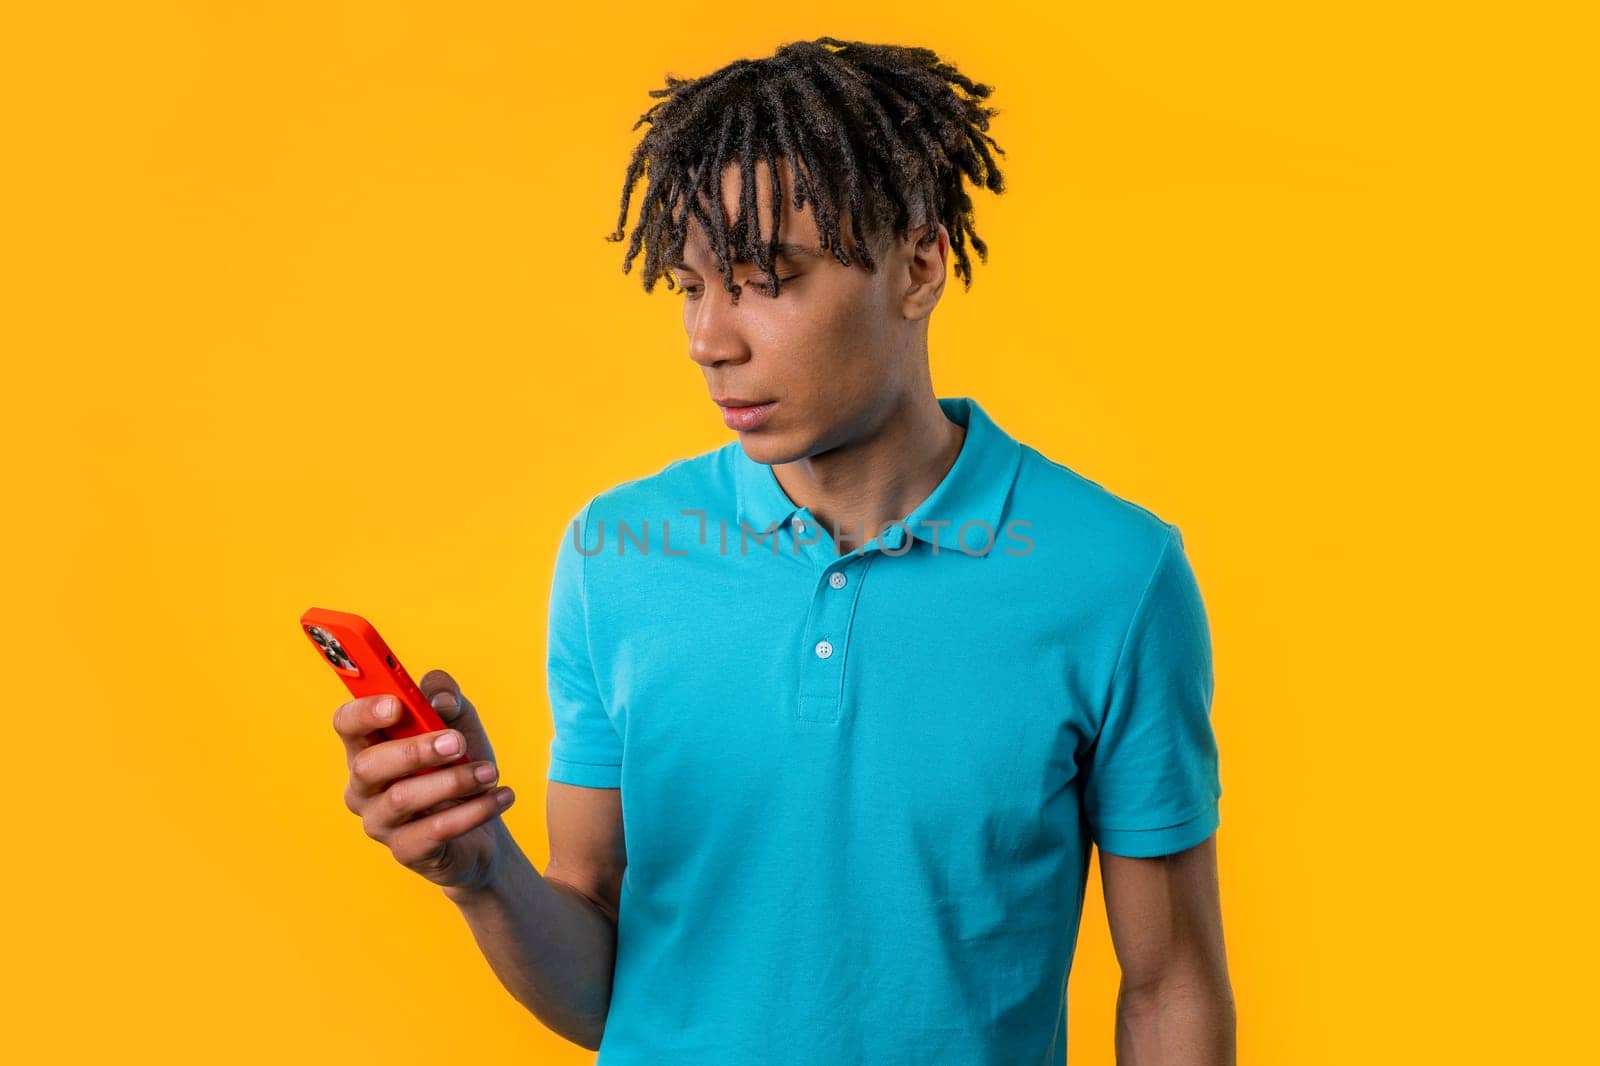 Handsome male teenager surfing internet on smartphone. Man with smile and joy on yellow background. Tech, success, happiness, social networks concept. High quality